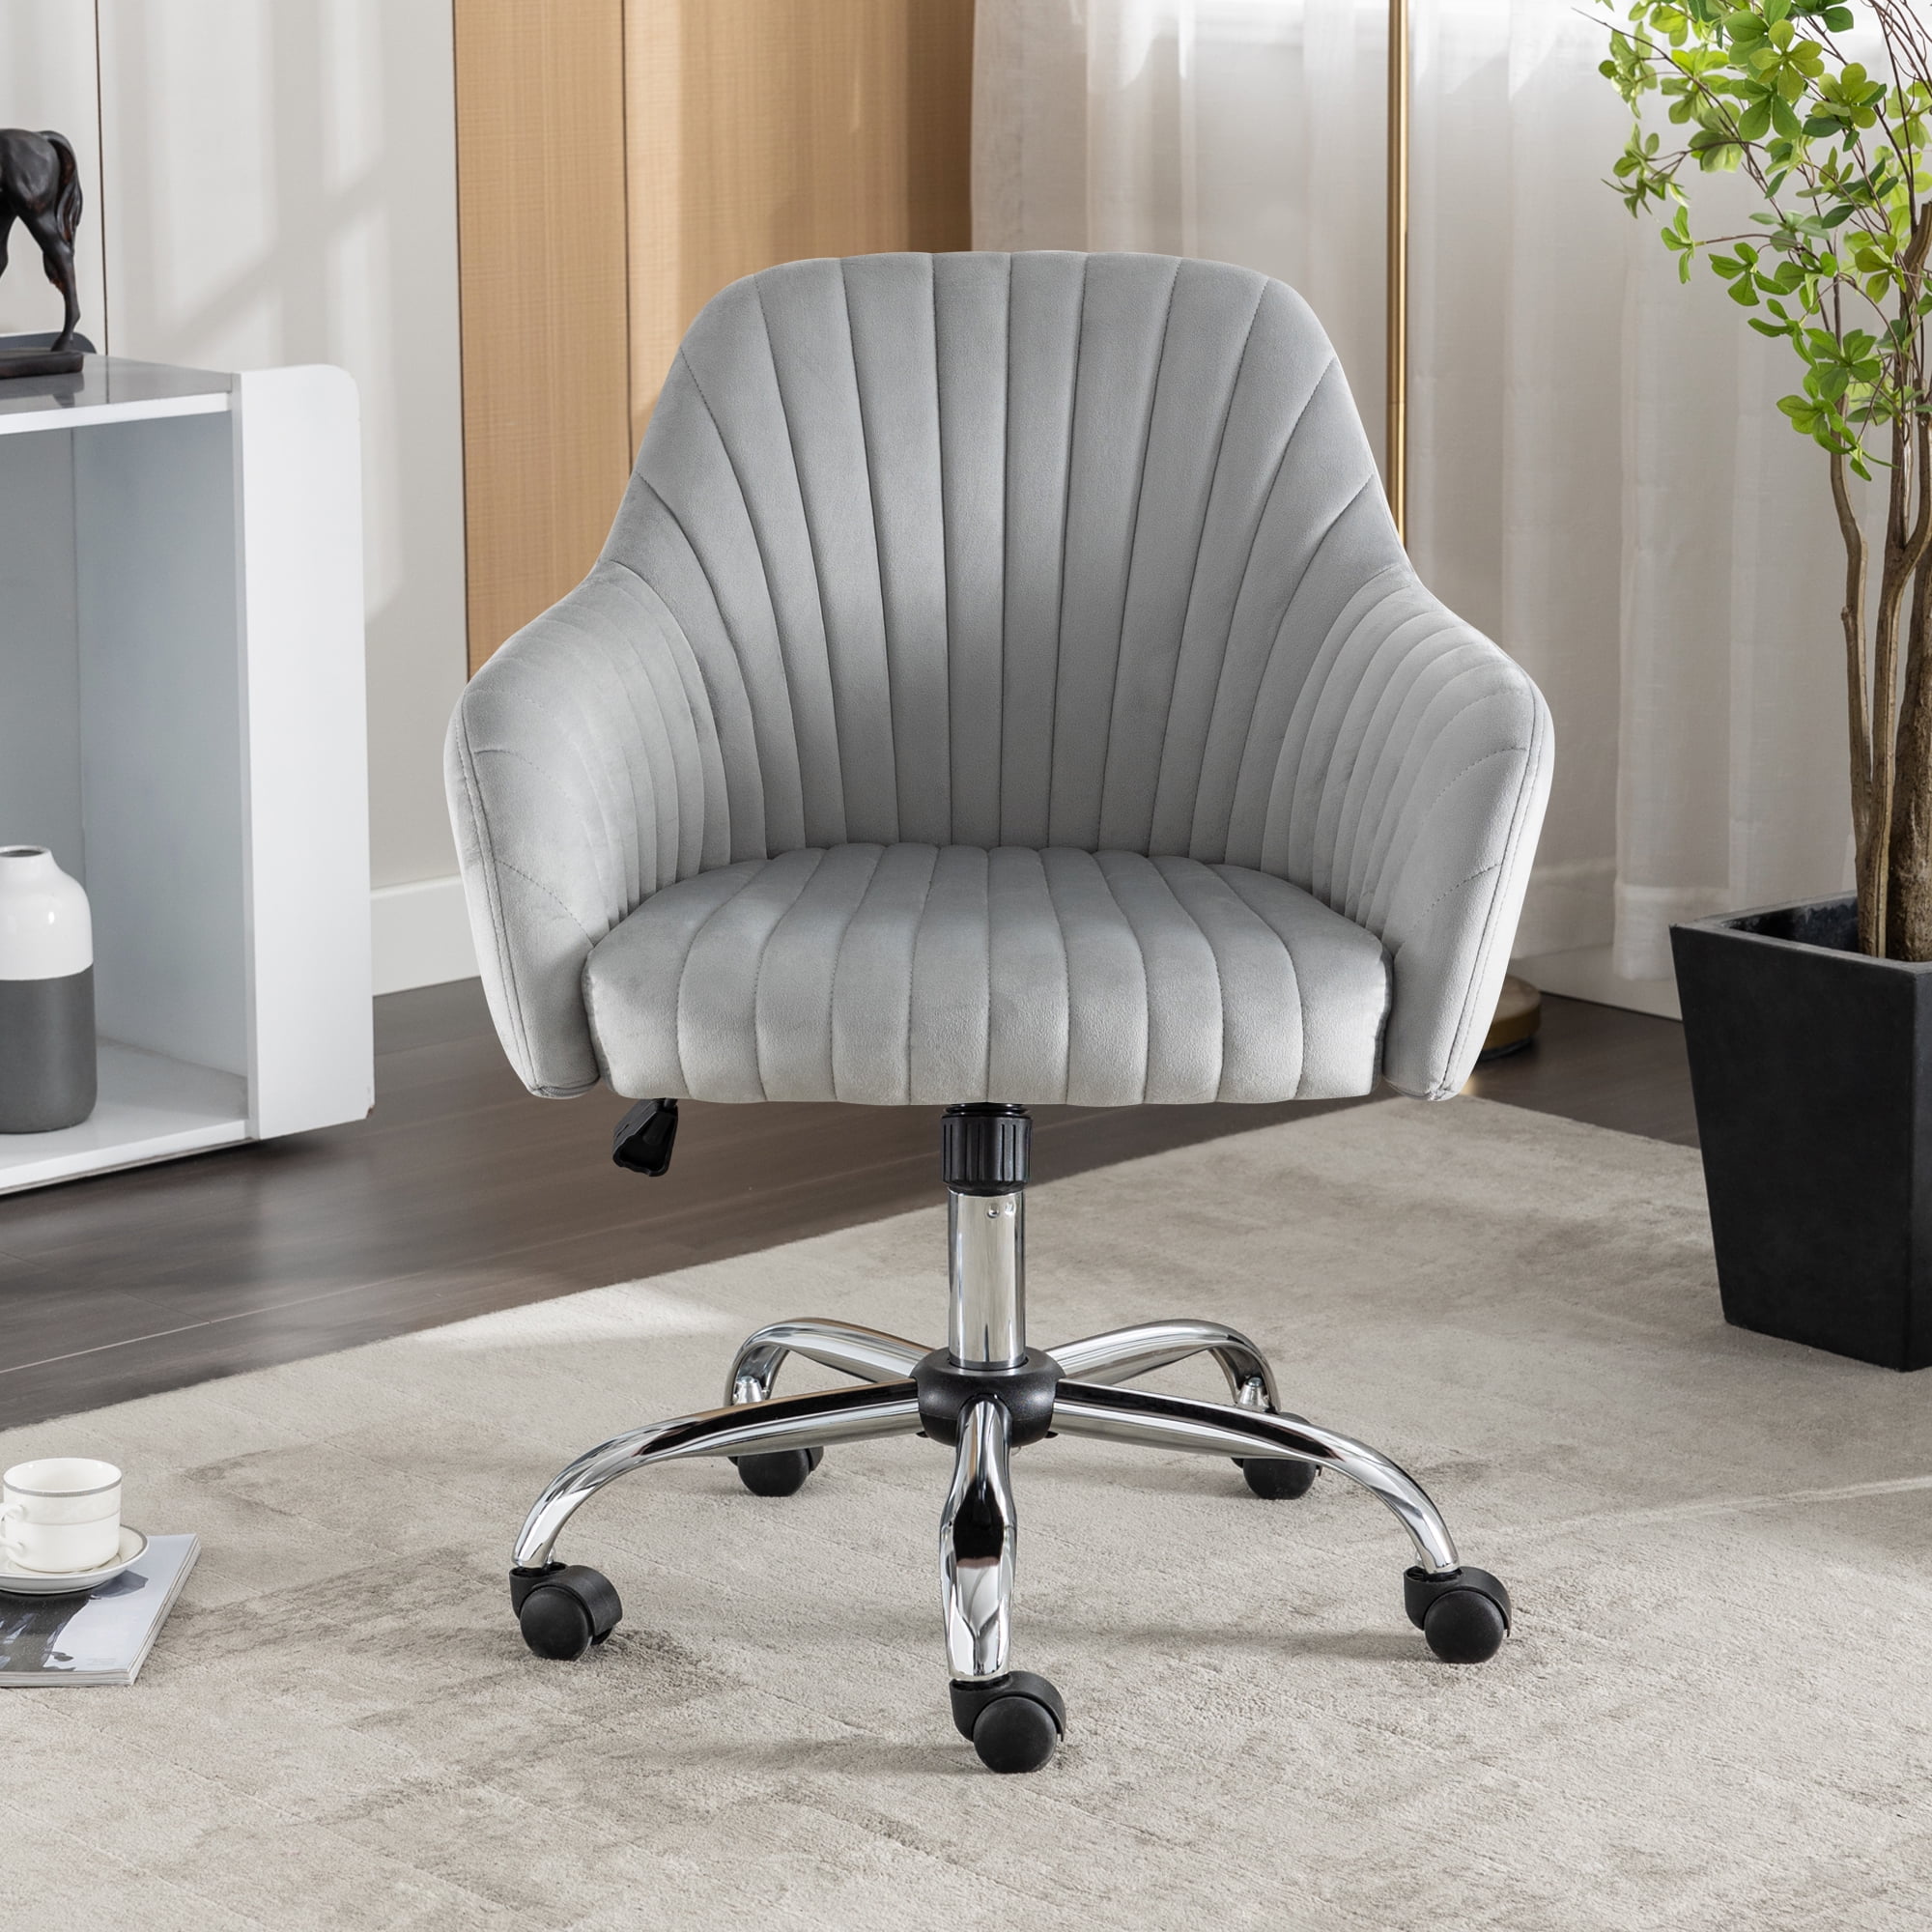 SYNGAR Office Desk Chair with Adjustable Height, Modern Arms Chair ...